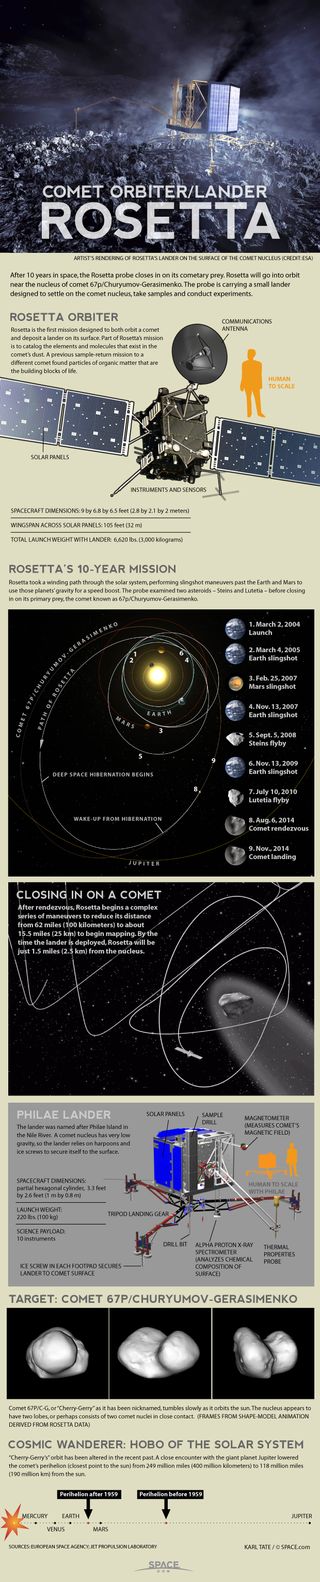 The two-part Rosetta spacecraft is designed to orbit and land on the Comet 67P/Churyumov-Gerasimenko in November 2014. See how the Rosetta spacecraft works in this Space.com infographic.